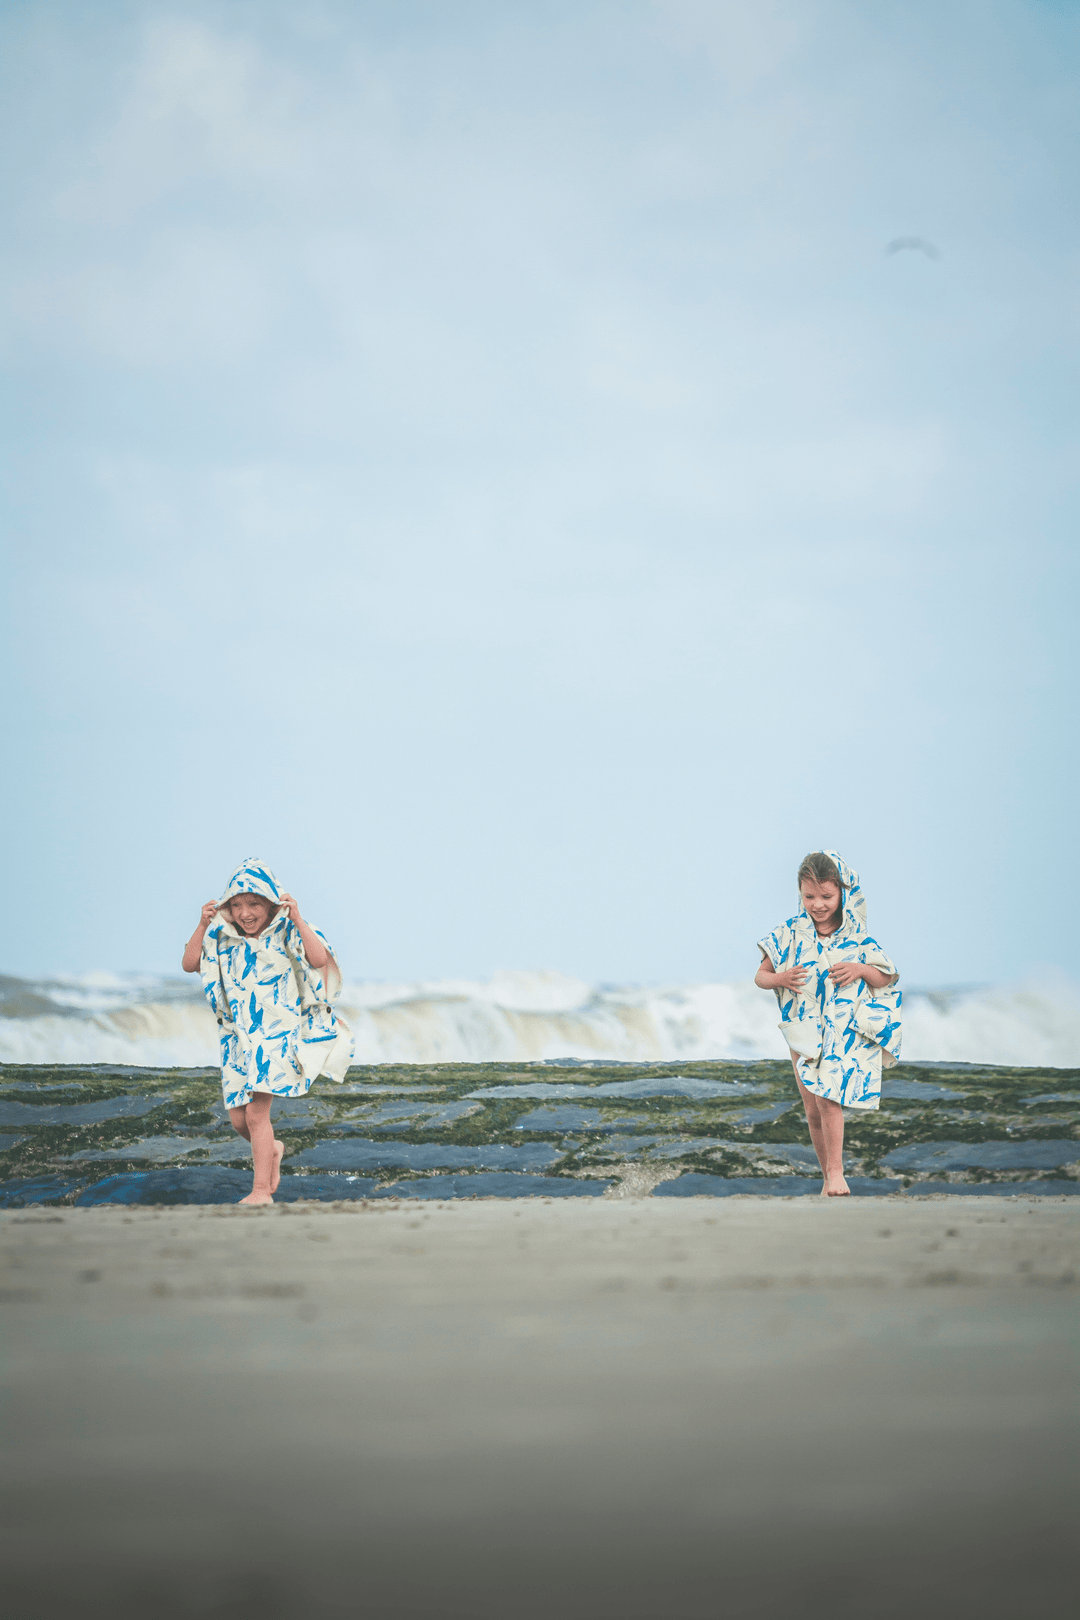 The kids surf poncho is an essential for those little kiddo’s who love running around the beach. No more struggle to get them changed, no more worries about them getting cold. With our feather design they will be the star of the beach.